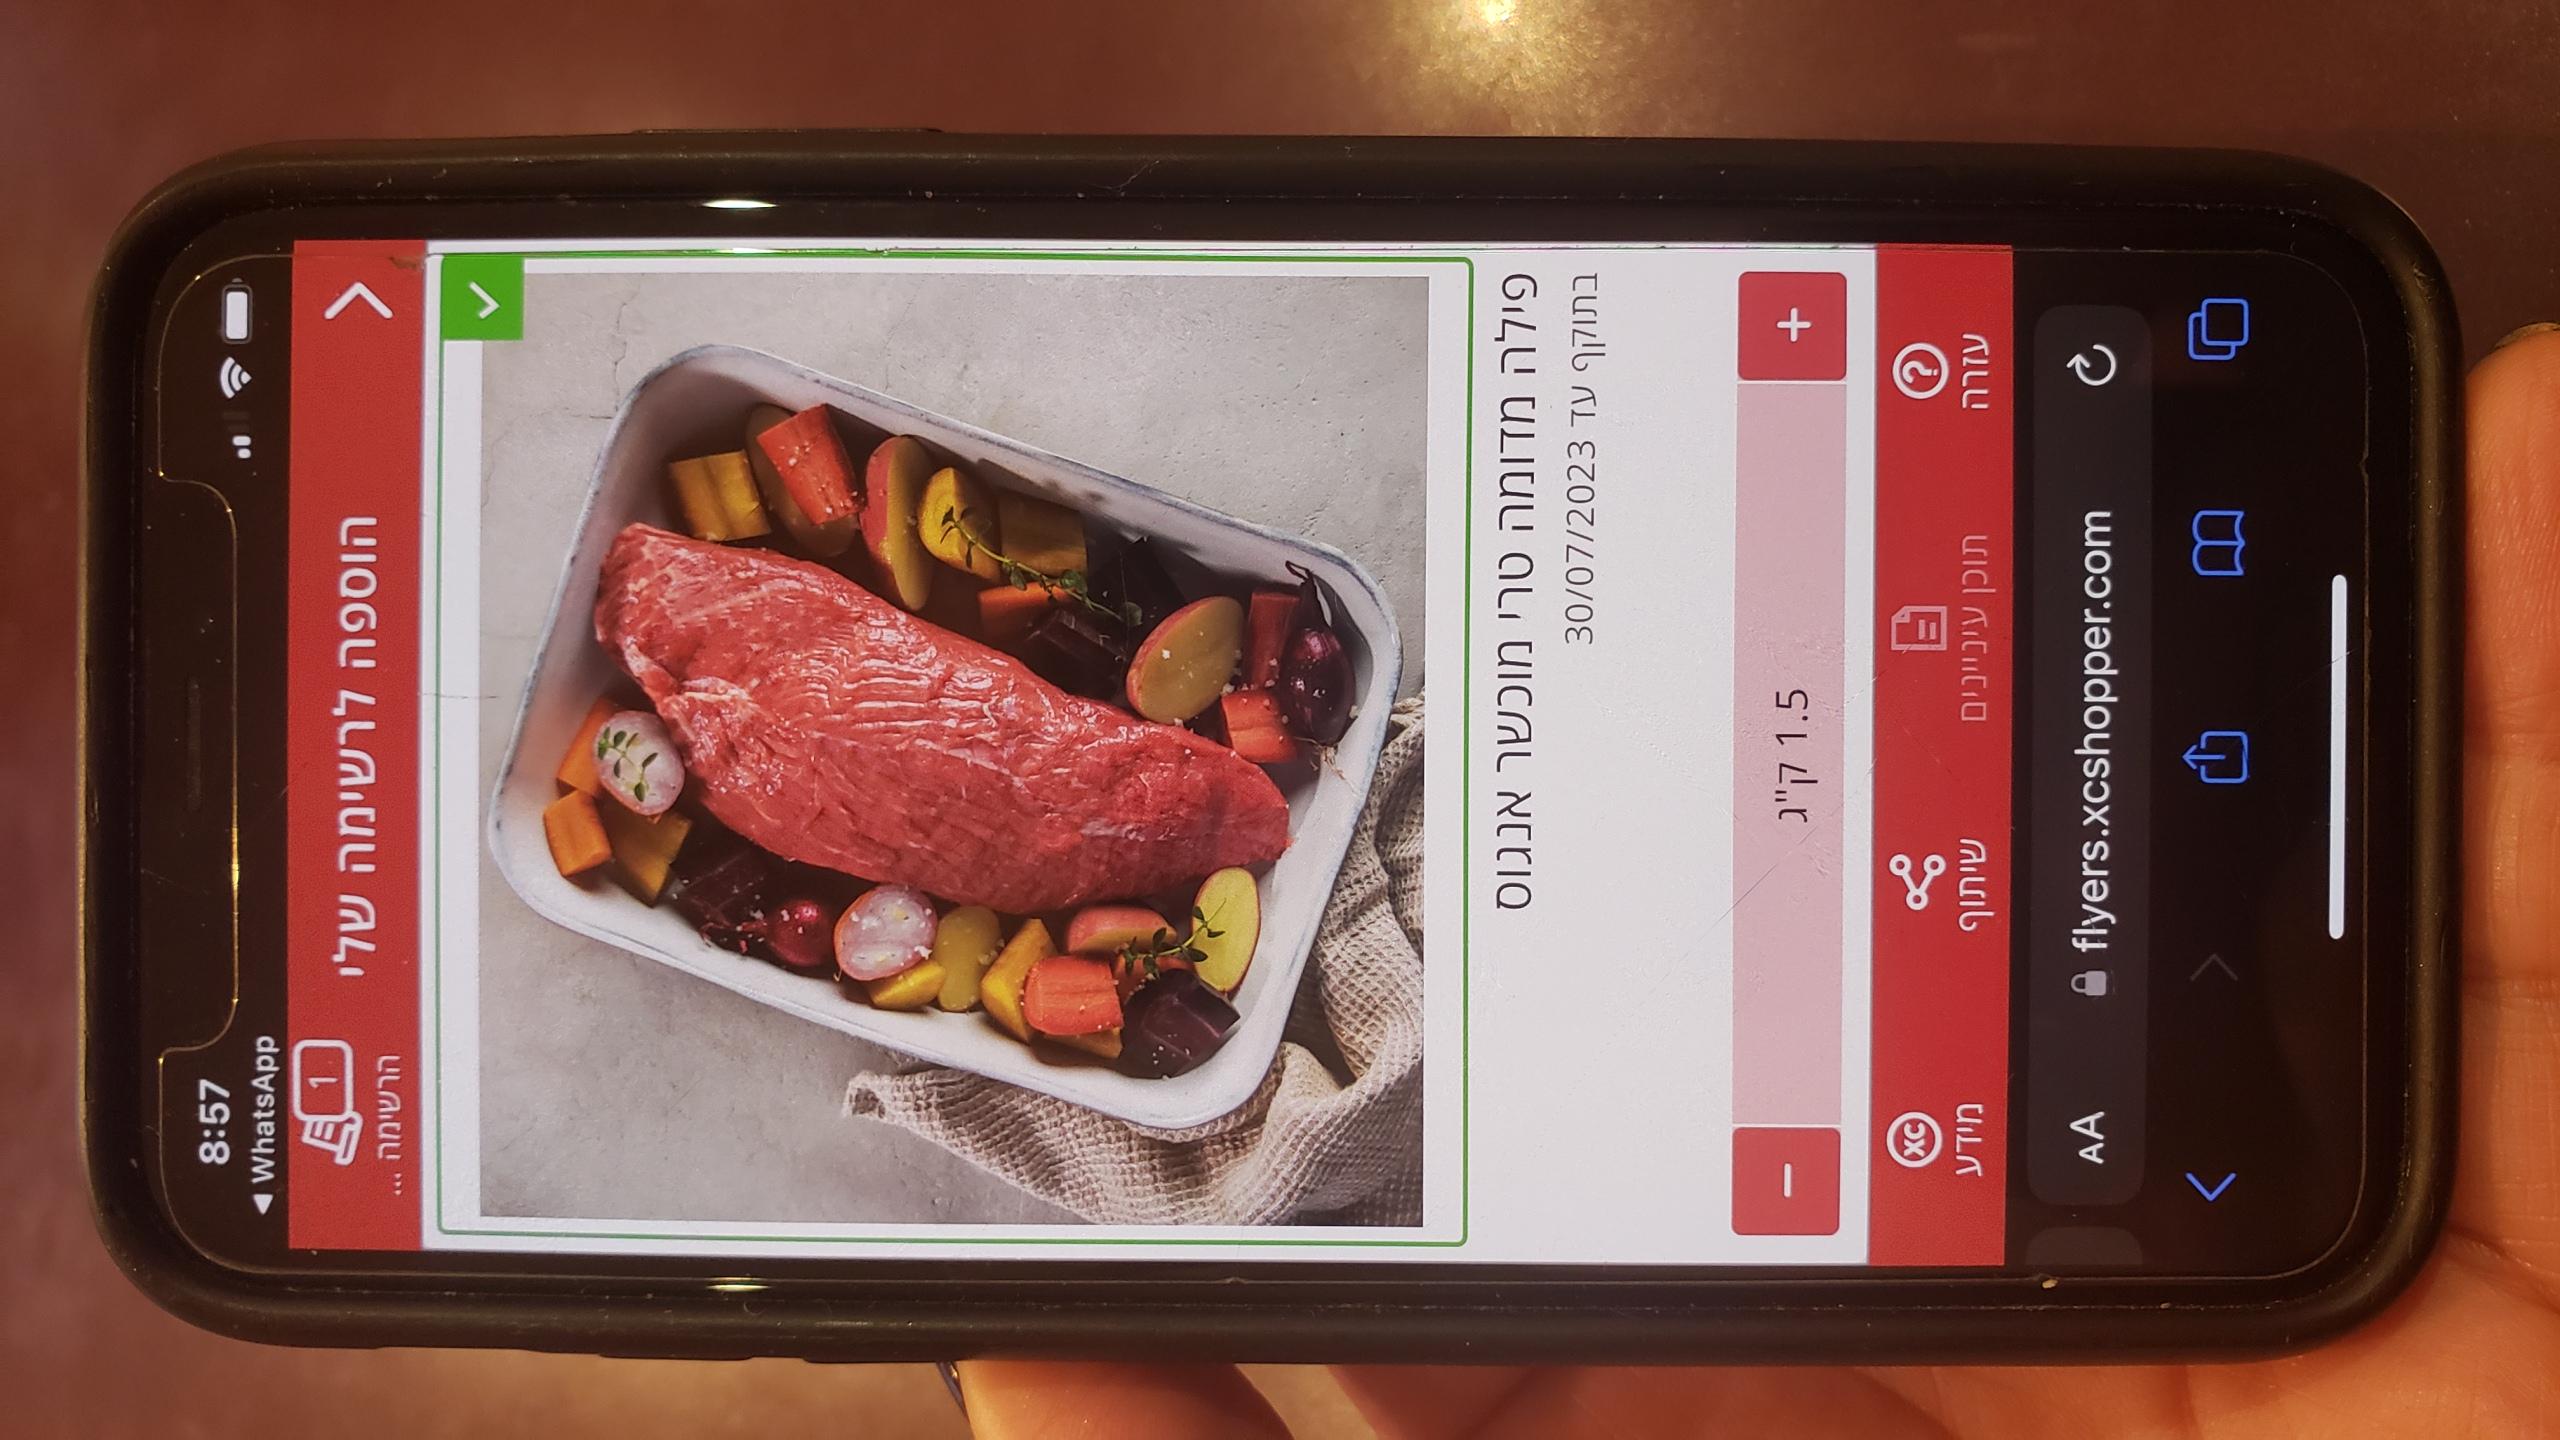 Add products to your list and checkout via WhatsApp to the meat or deli department in your store. Win-win - Consumers save waiting time, your departments streamline their orders fulfilment. Increase sales and improve service.